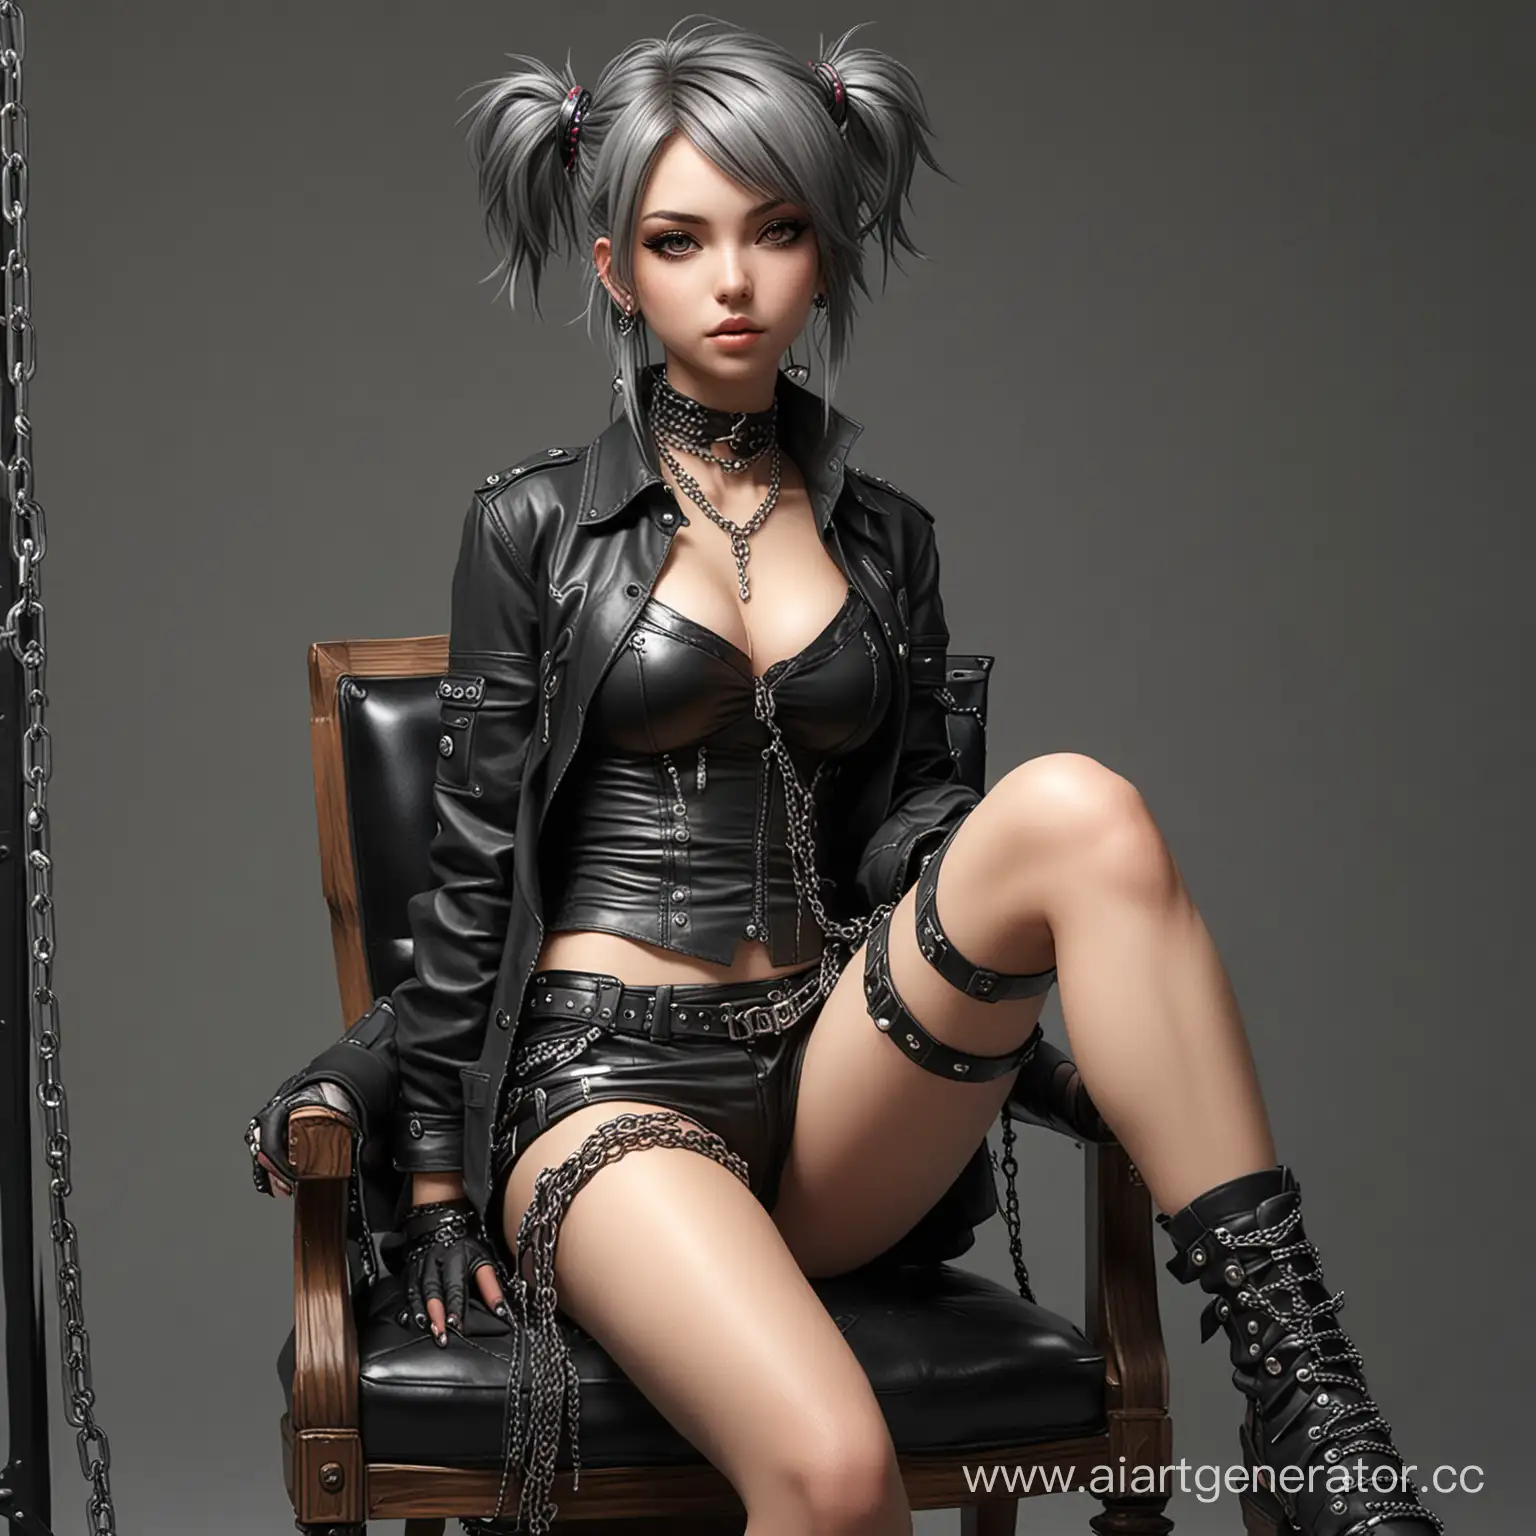 Pompous-Anime-Punk-Girl-Sitting-on-Chair-with-Detailed-Clothing-and-Chains